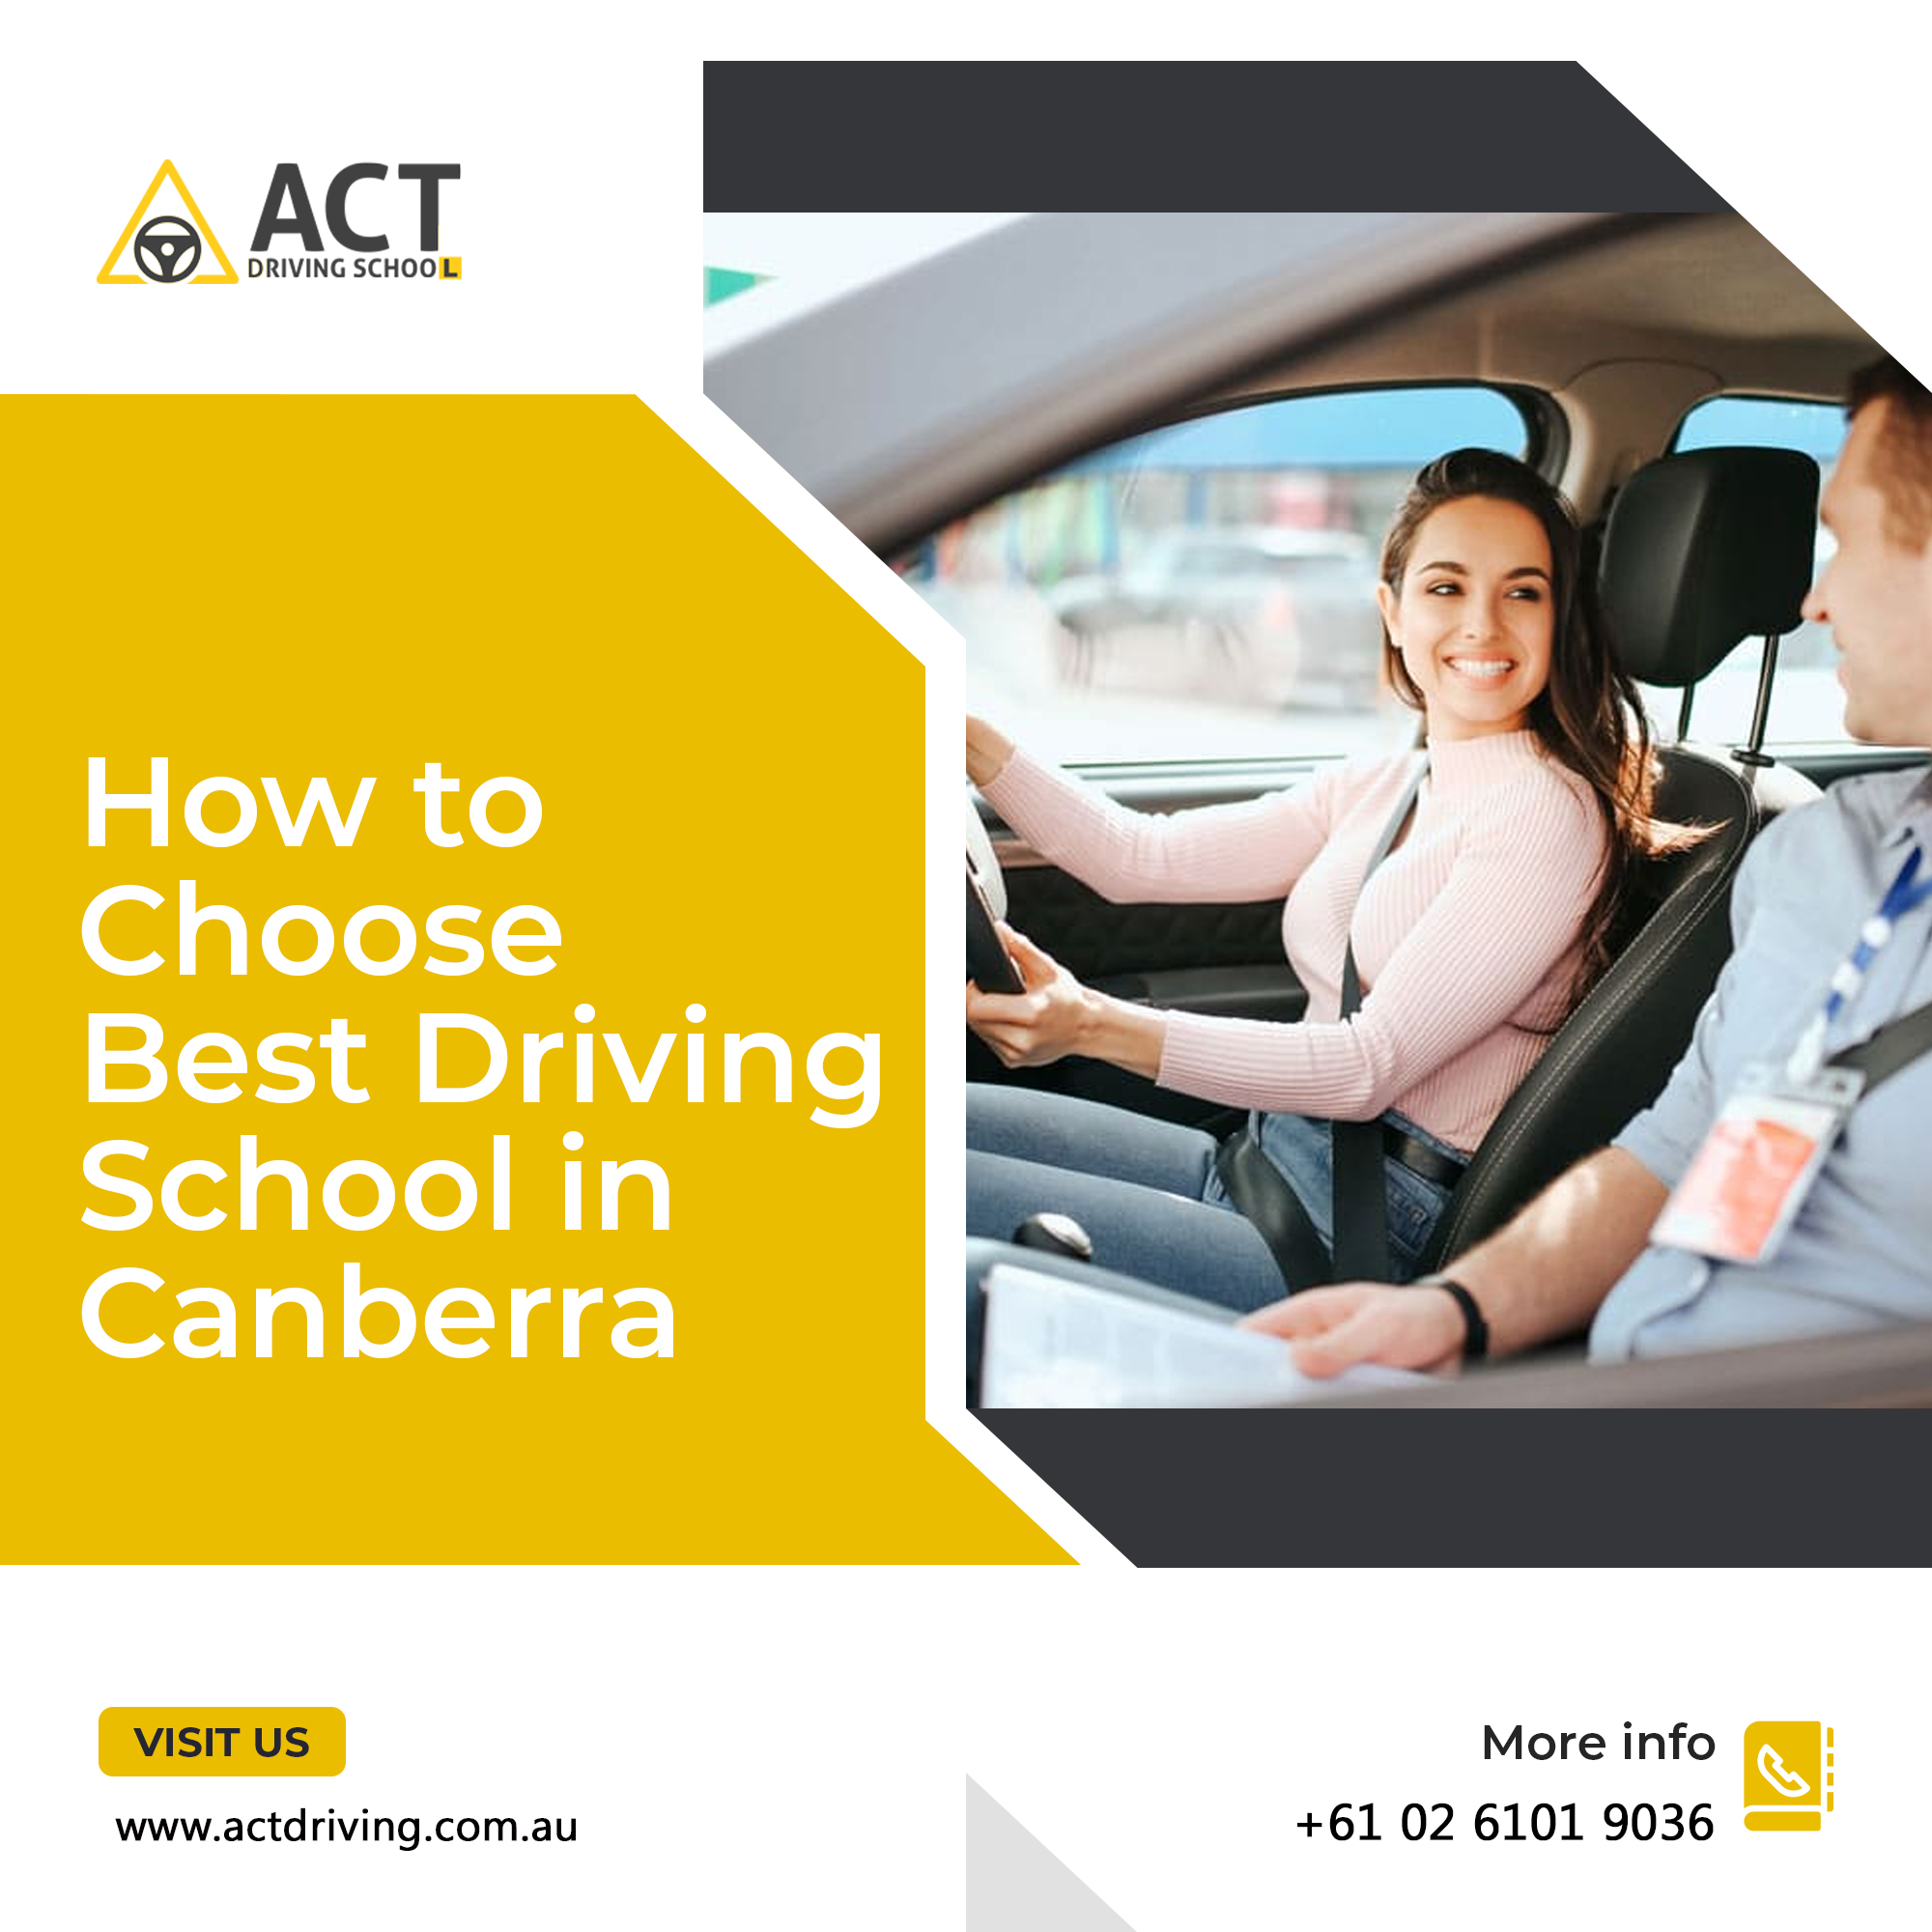 How to Choose Best Driving School in Canberra